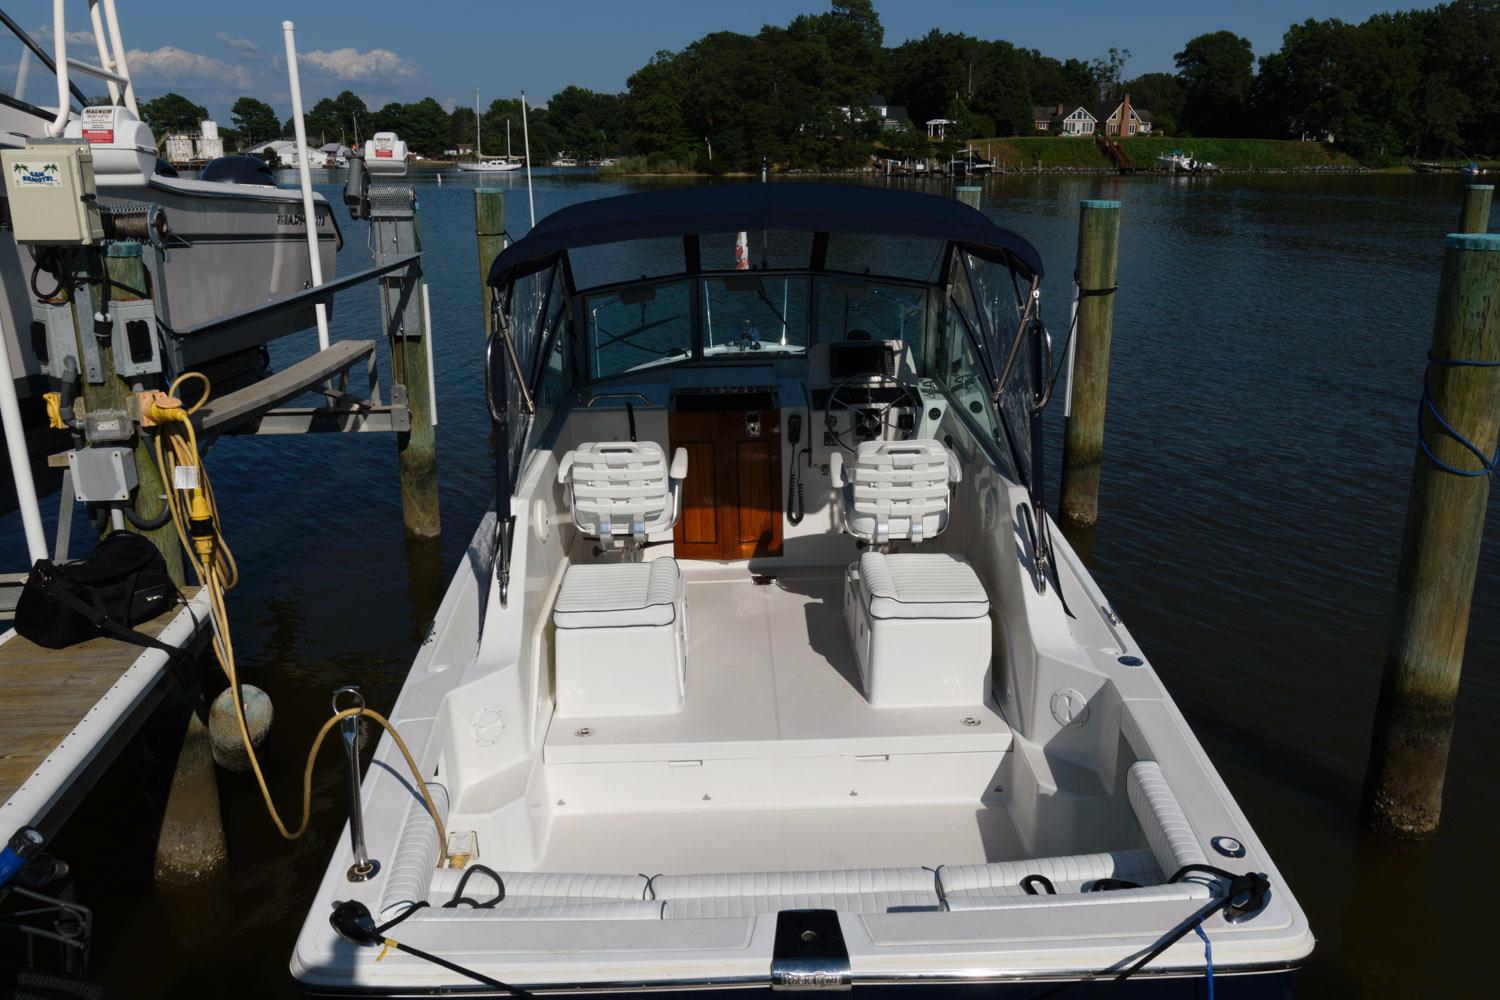 M 7159 MD Knot 10 Yacht Sales